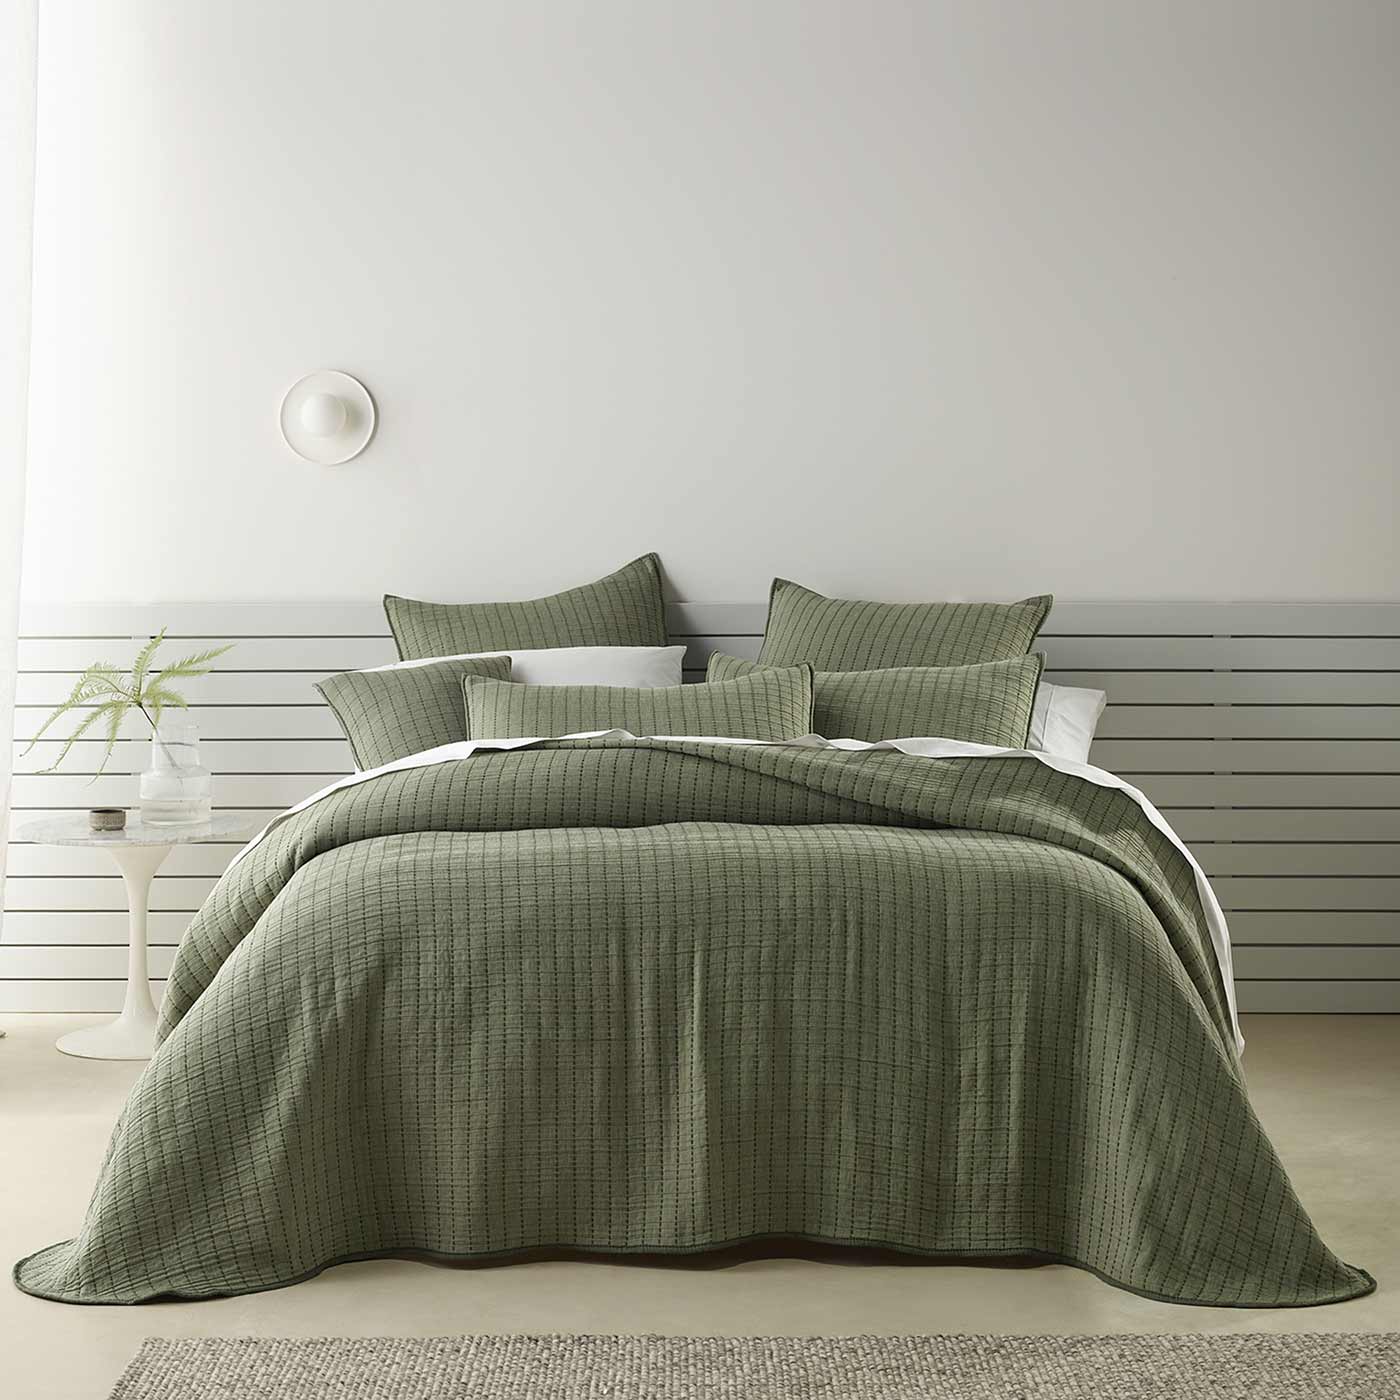 An easy-care bedspread that requires no ironing and becomes softer after laundering. This design is cleverly contrasted with dark green stitching and features a 200gsm polyester fill for added comfort and warmth. 